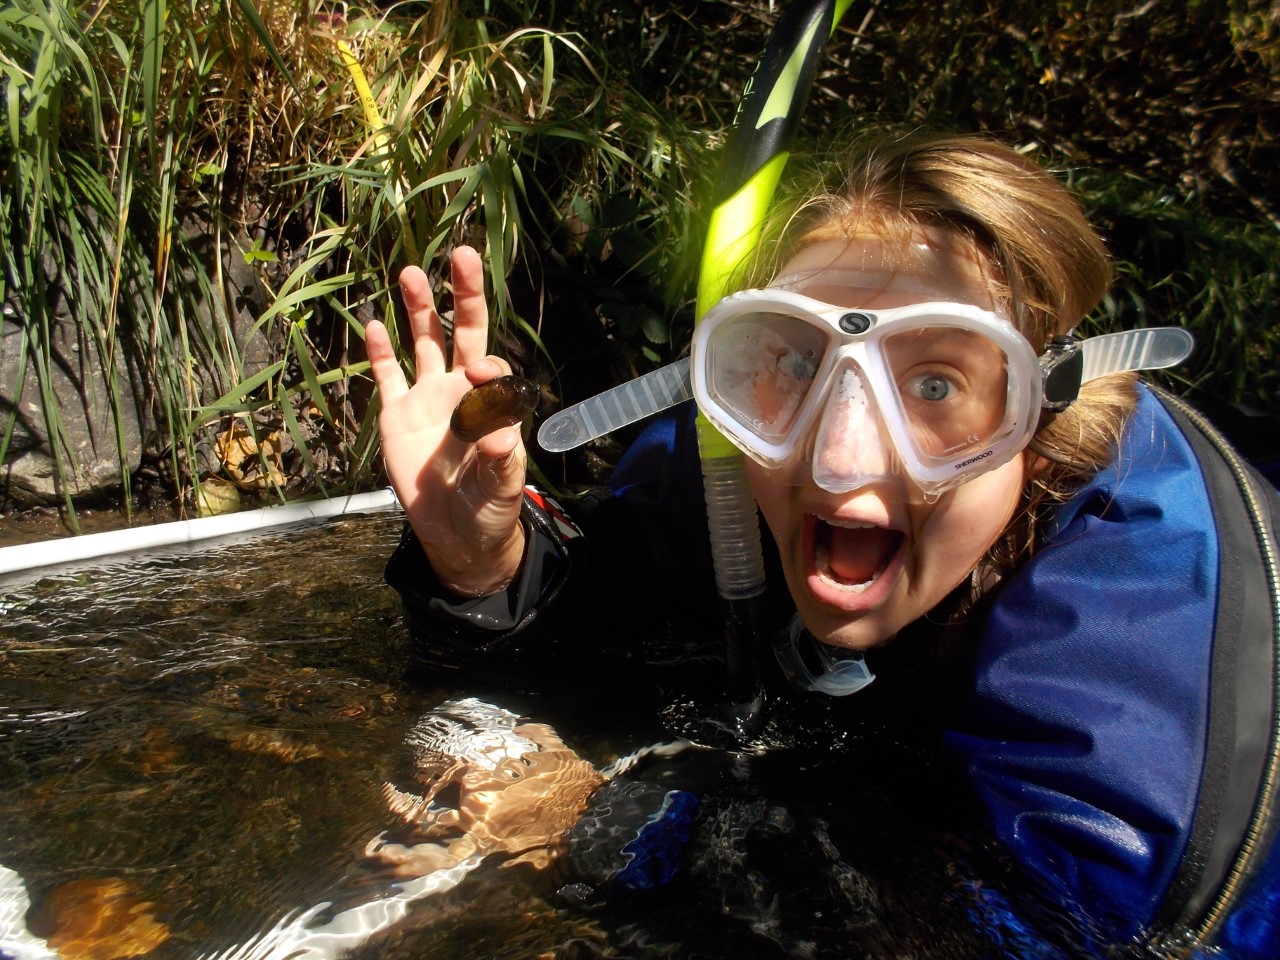 Laura in snorkeling gear showing a mussel from a stream while sampling for her masters work